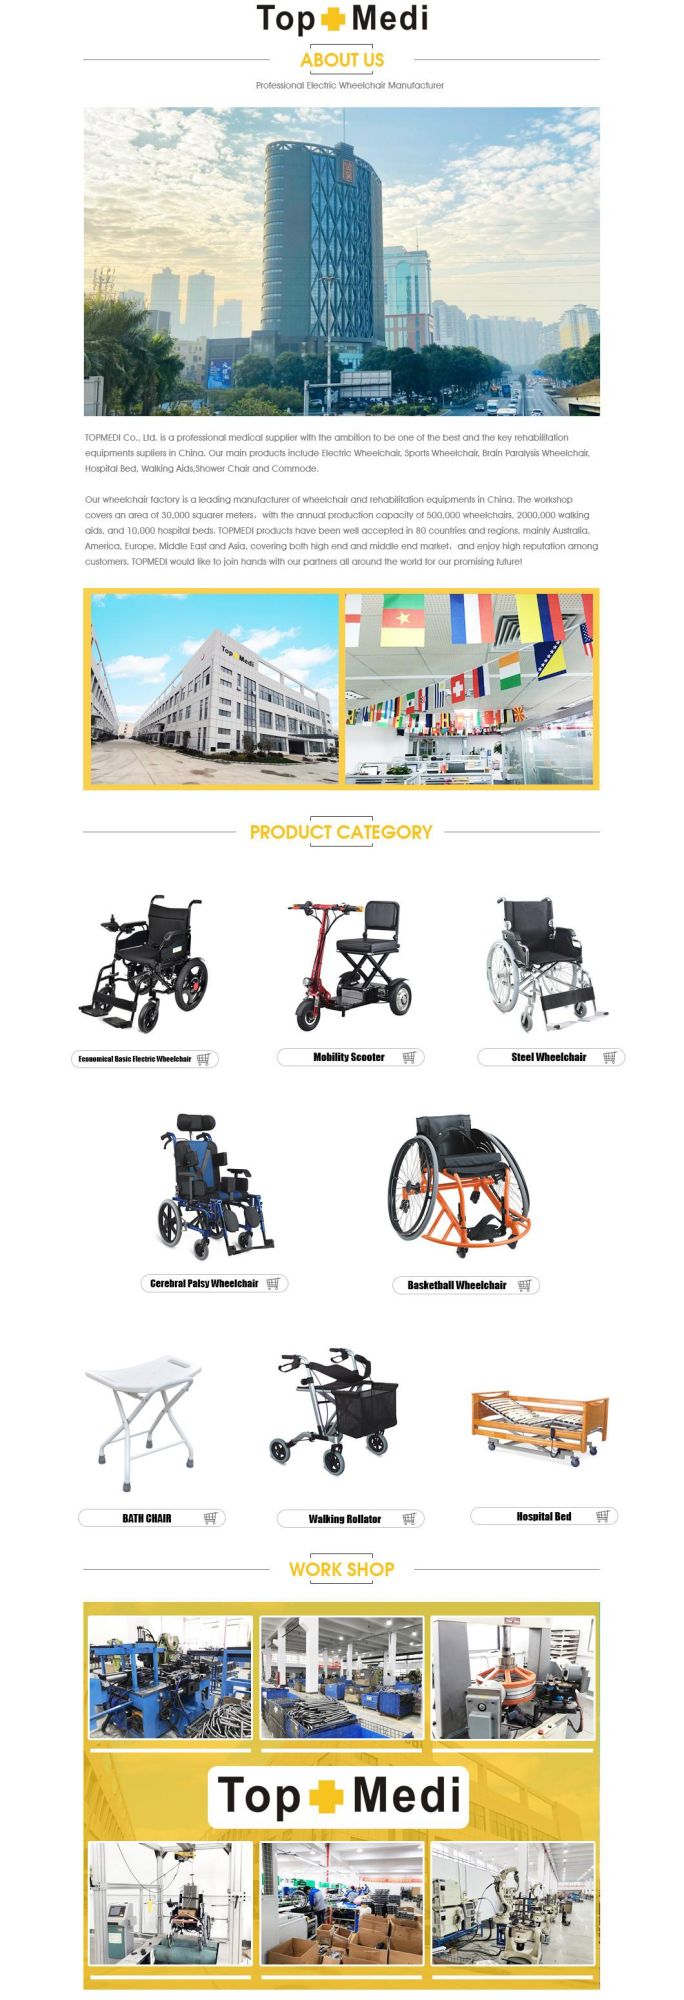 Topmedi Non-Tilted Carton Package 90X48X85 Cm China Foldable Wheelchair Tew002